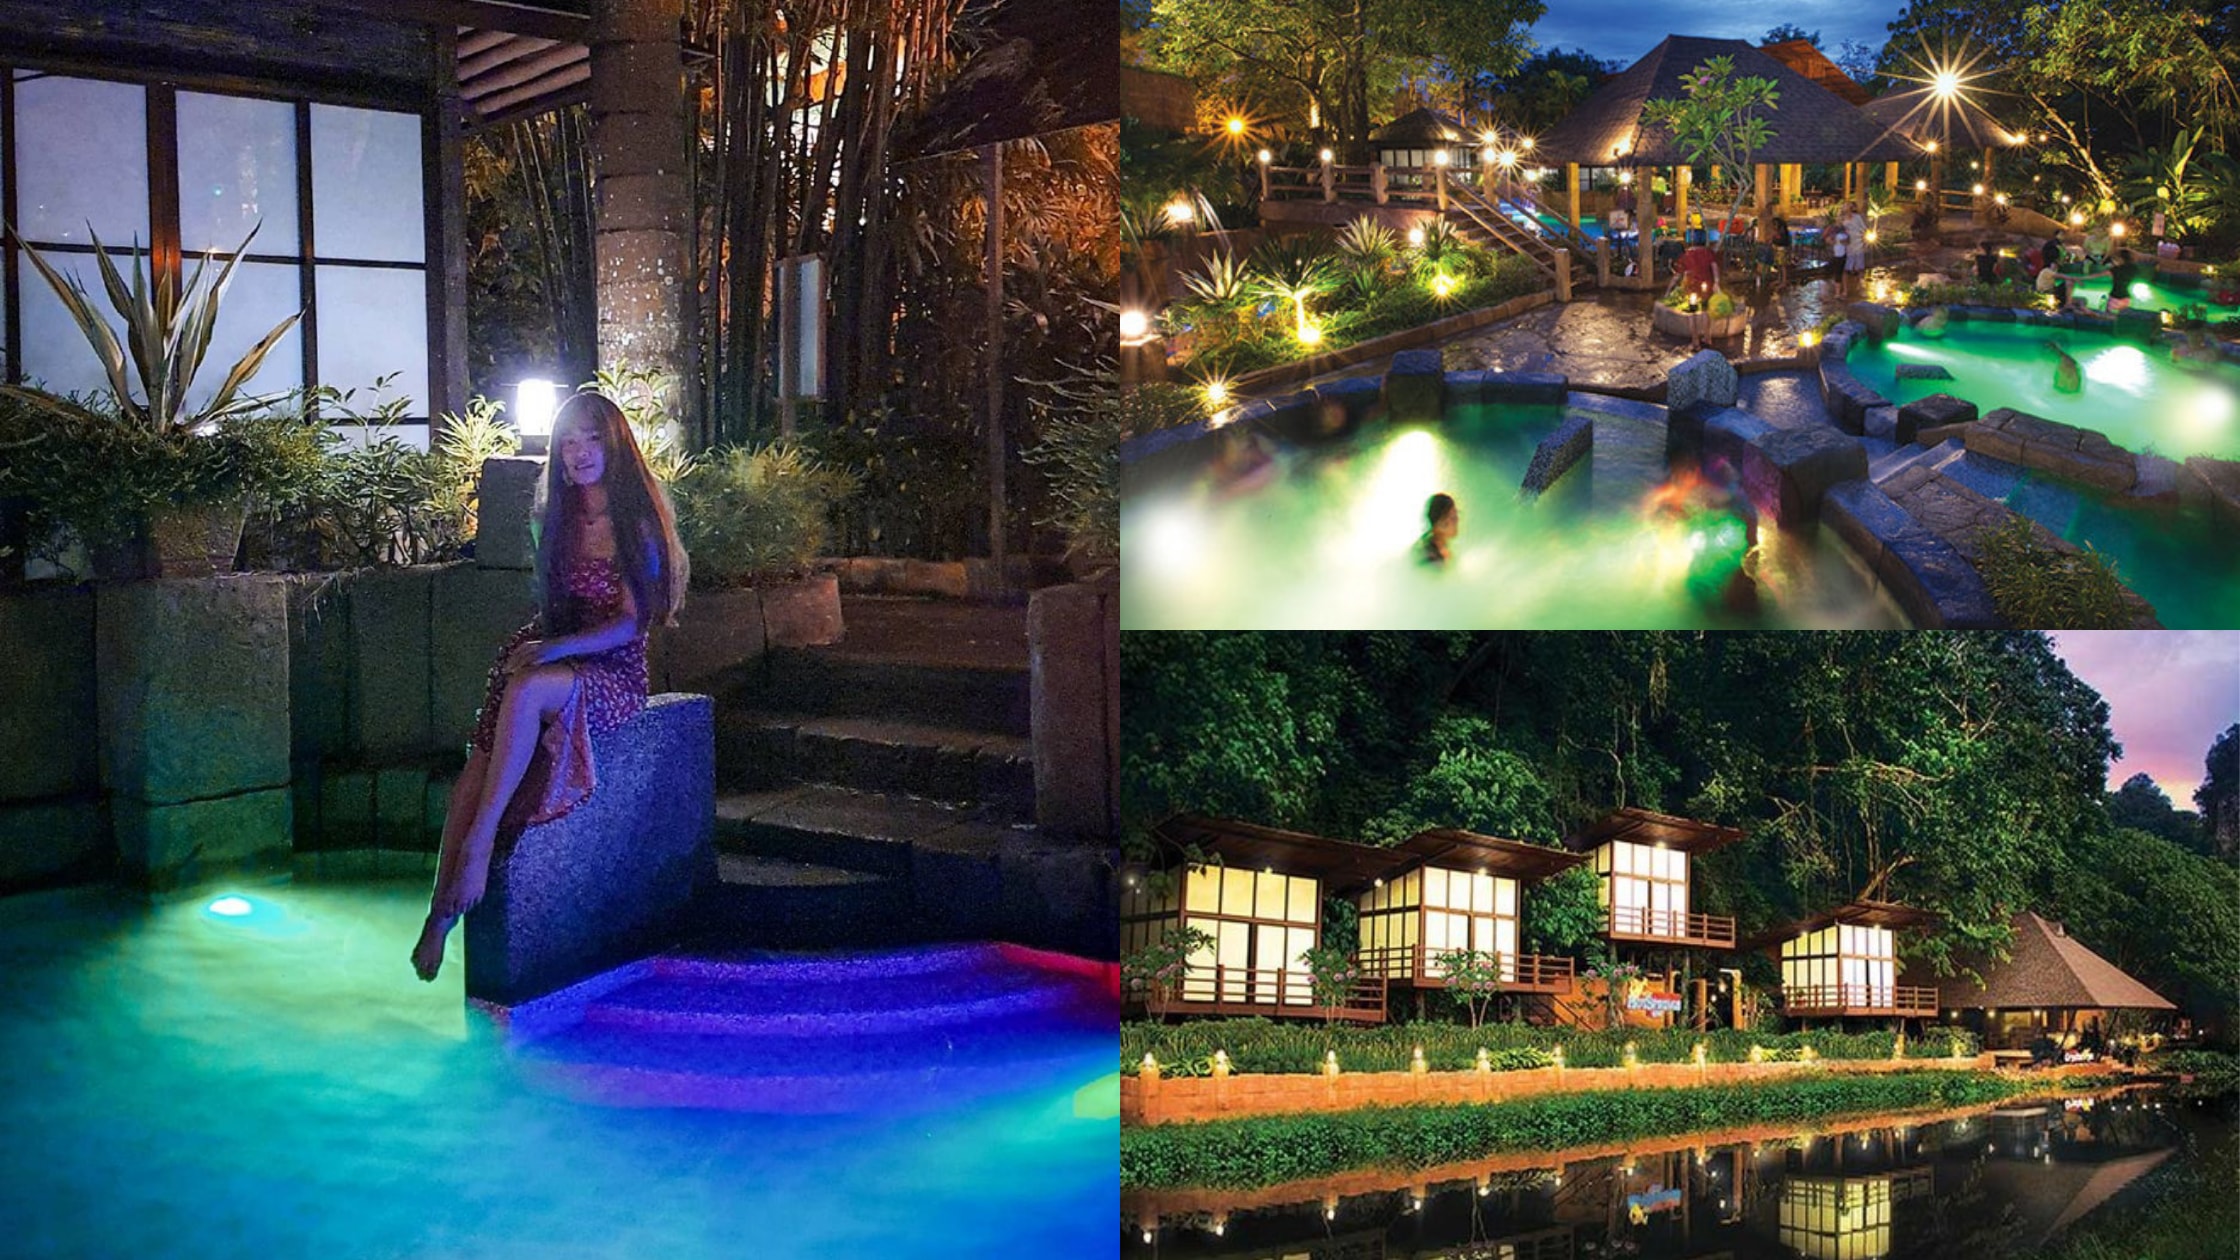 Lost World Of Tambun Hot Springs And Spa Unwind And Relax In The Natural Hot Springs Of Ipoh Klook Travel Blog